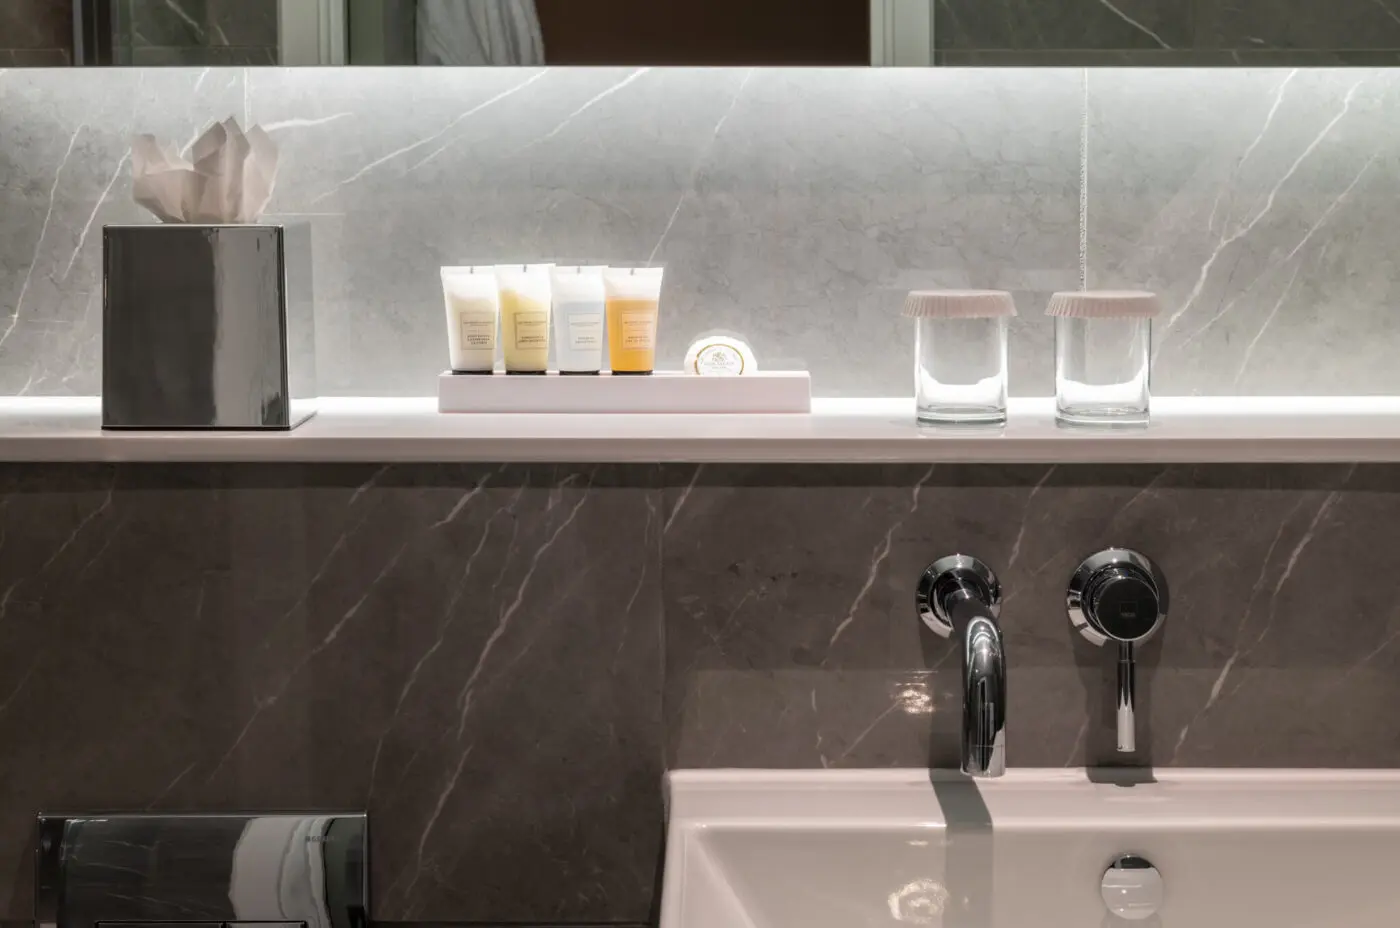 A bathroom with amenities